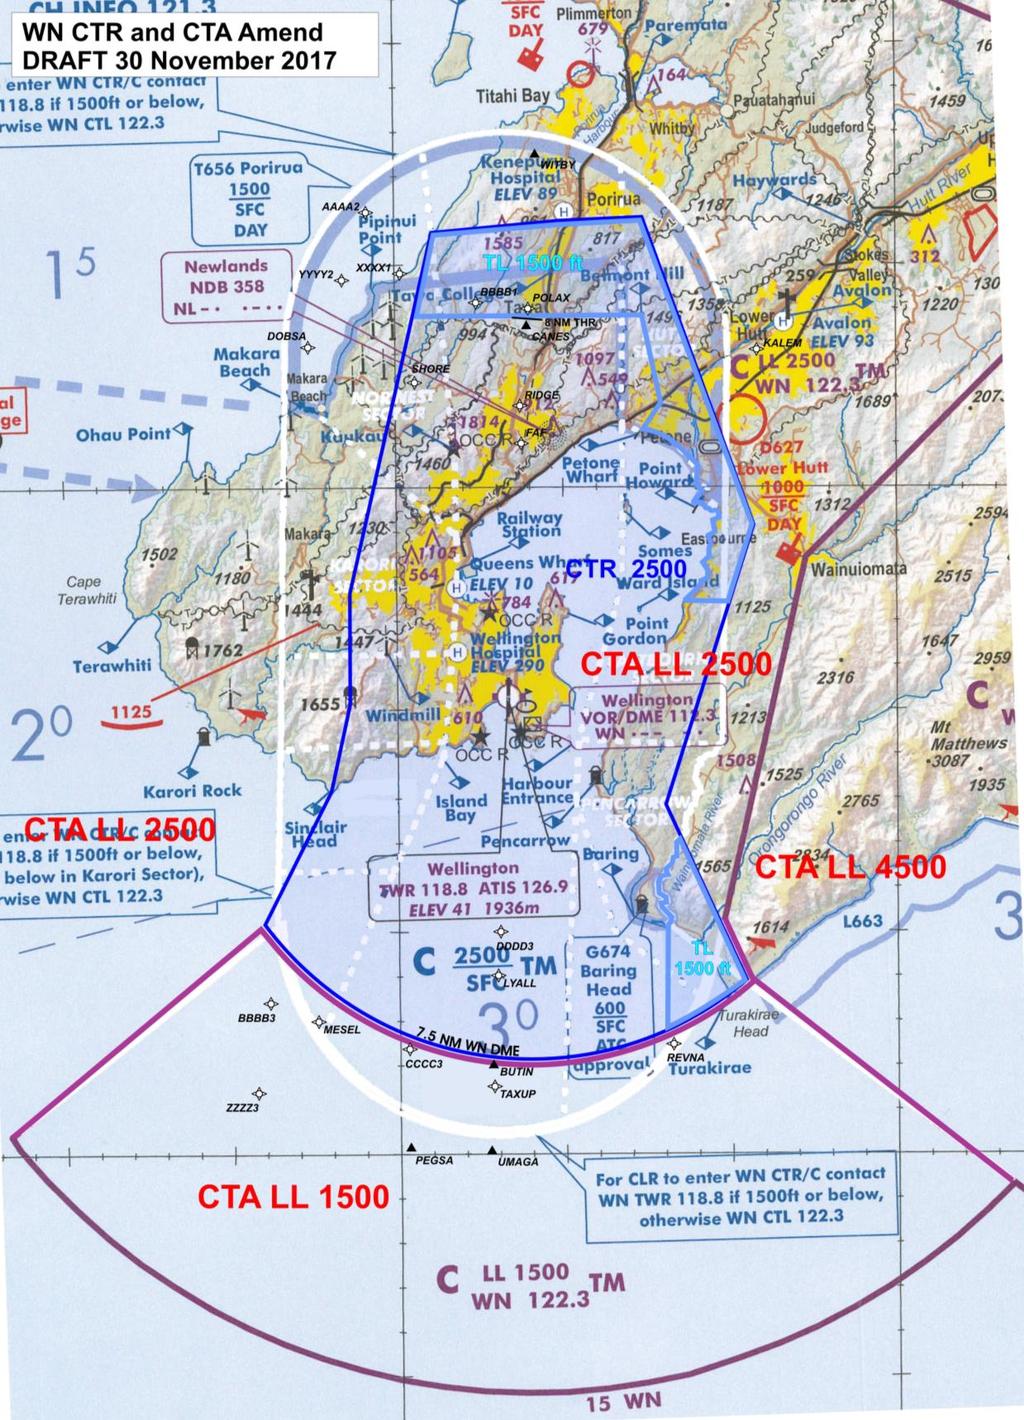 Requested amended WN CTR/C The requested amended WN CTR/C (NZA659) is depicted on Diagram 1 below. Co-ordinates for the amended CTR and other airspace boundary changes are given from page 19.